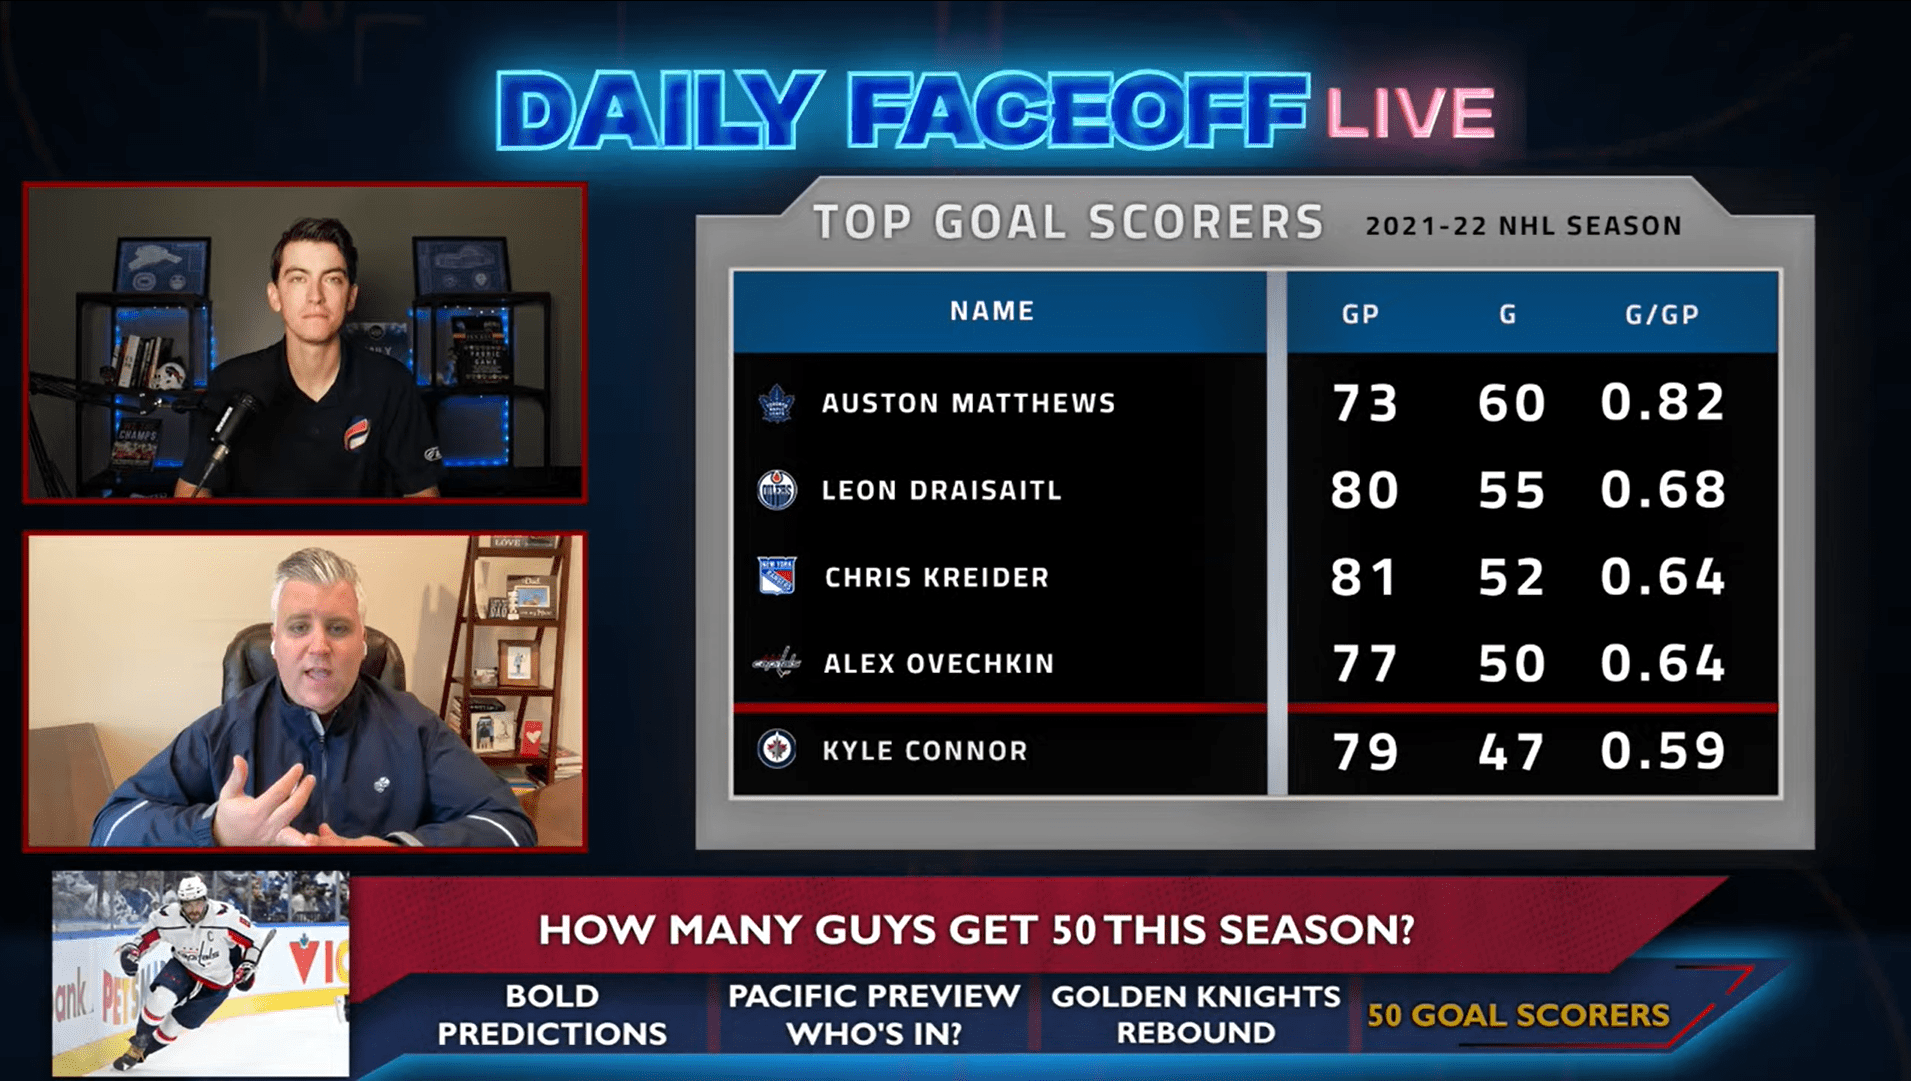 Daily Faceoff Live: How many players score 50 goals this season?